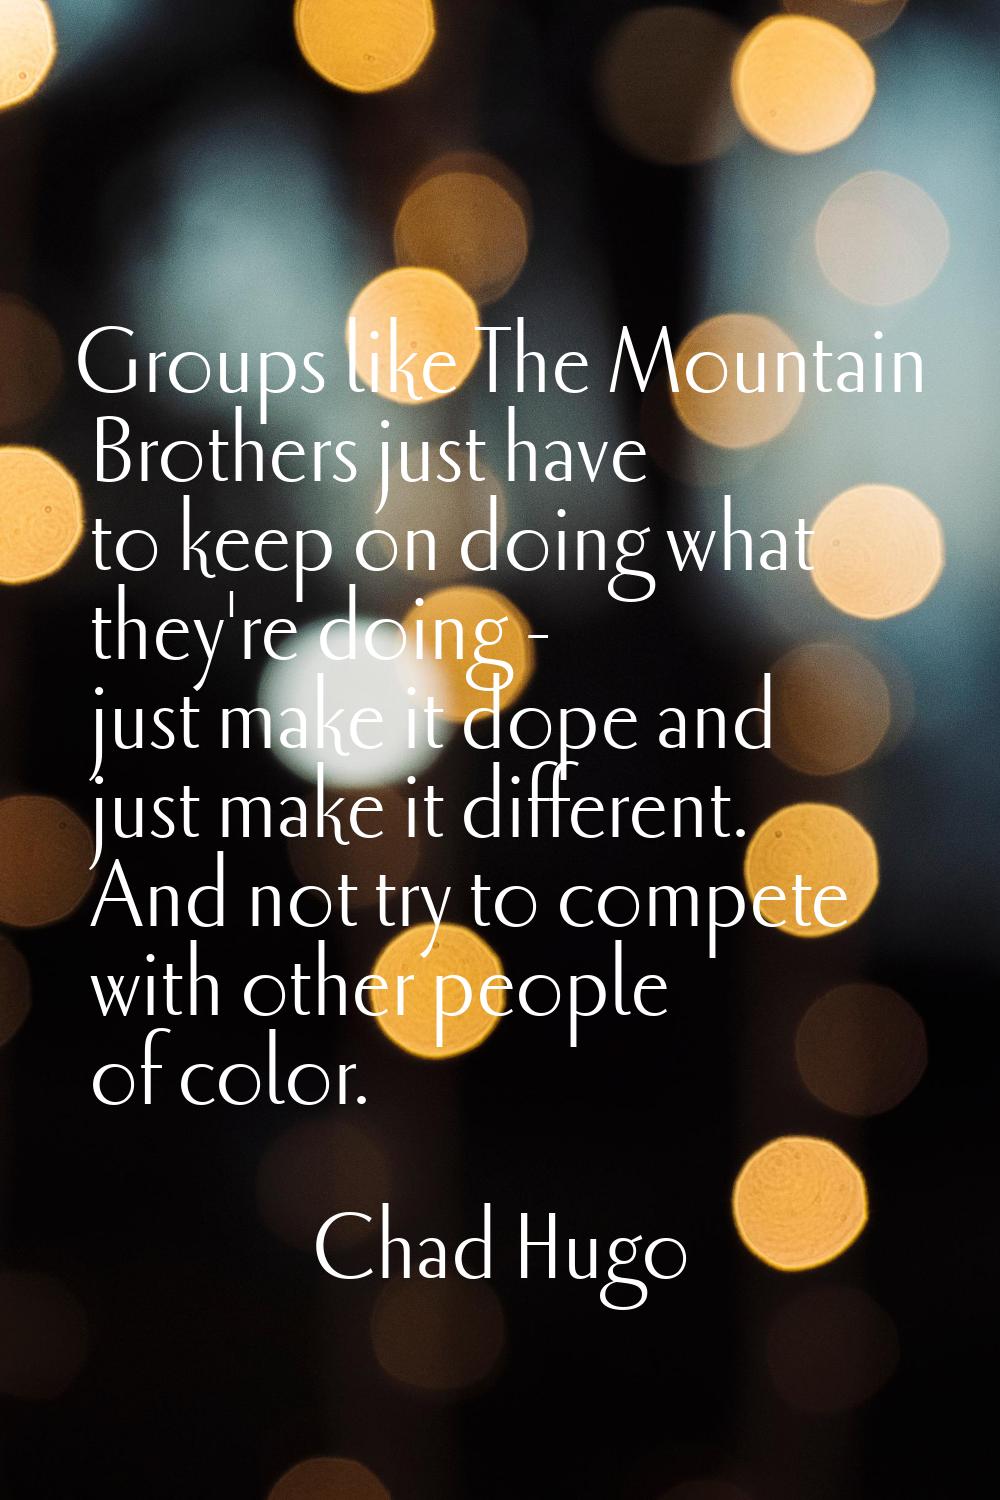 Groups like The Mountain Brothers just have to keep on doing what they're doing - just make it dope